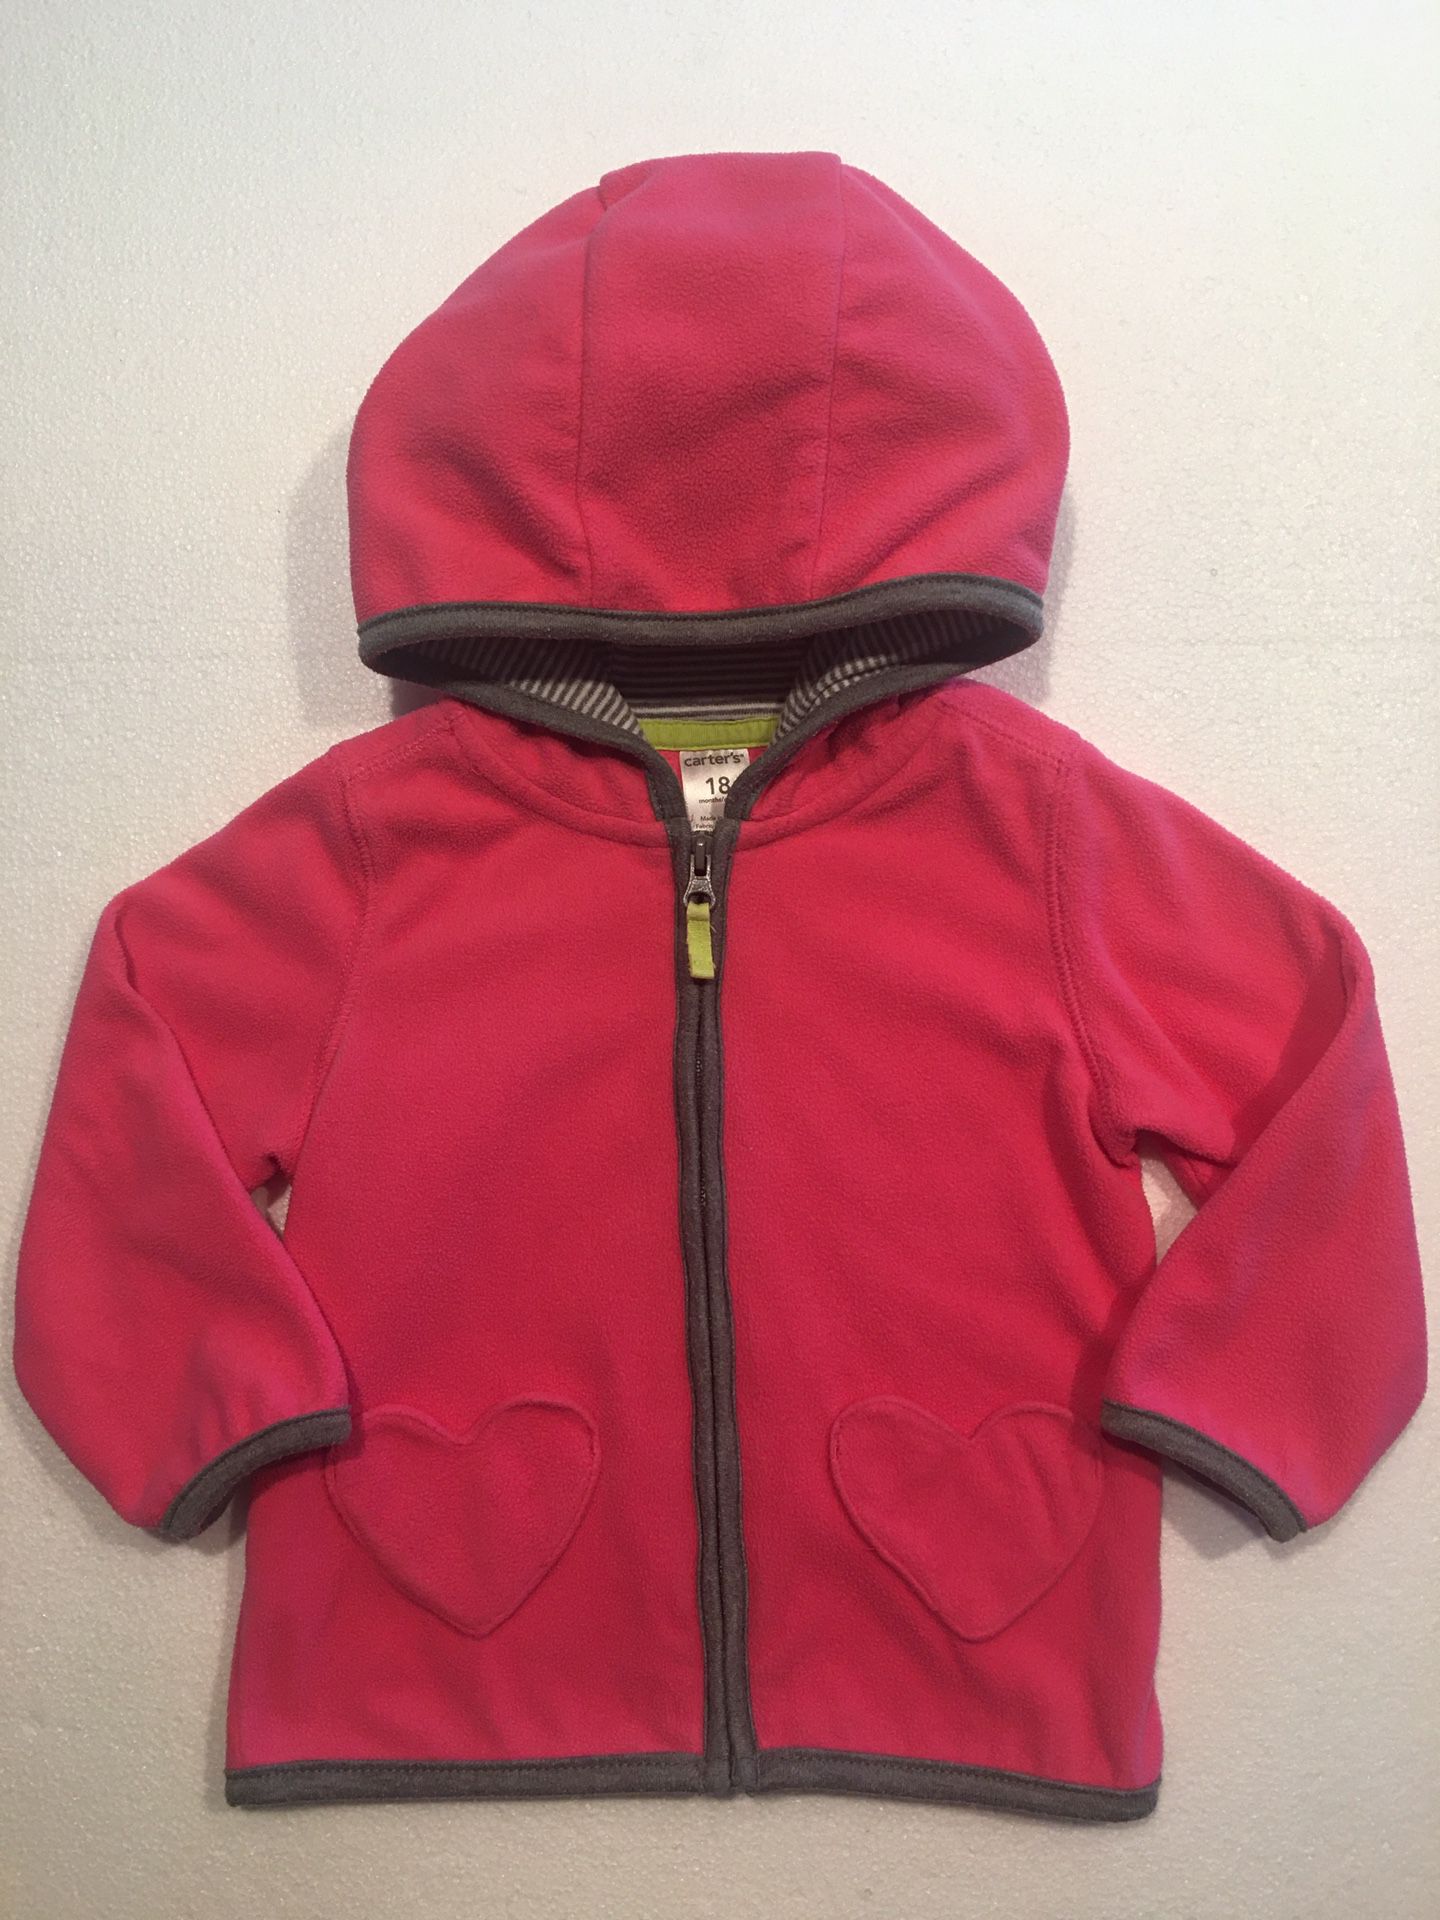 Carter’s hooded jacket 18 mos